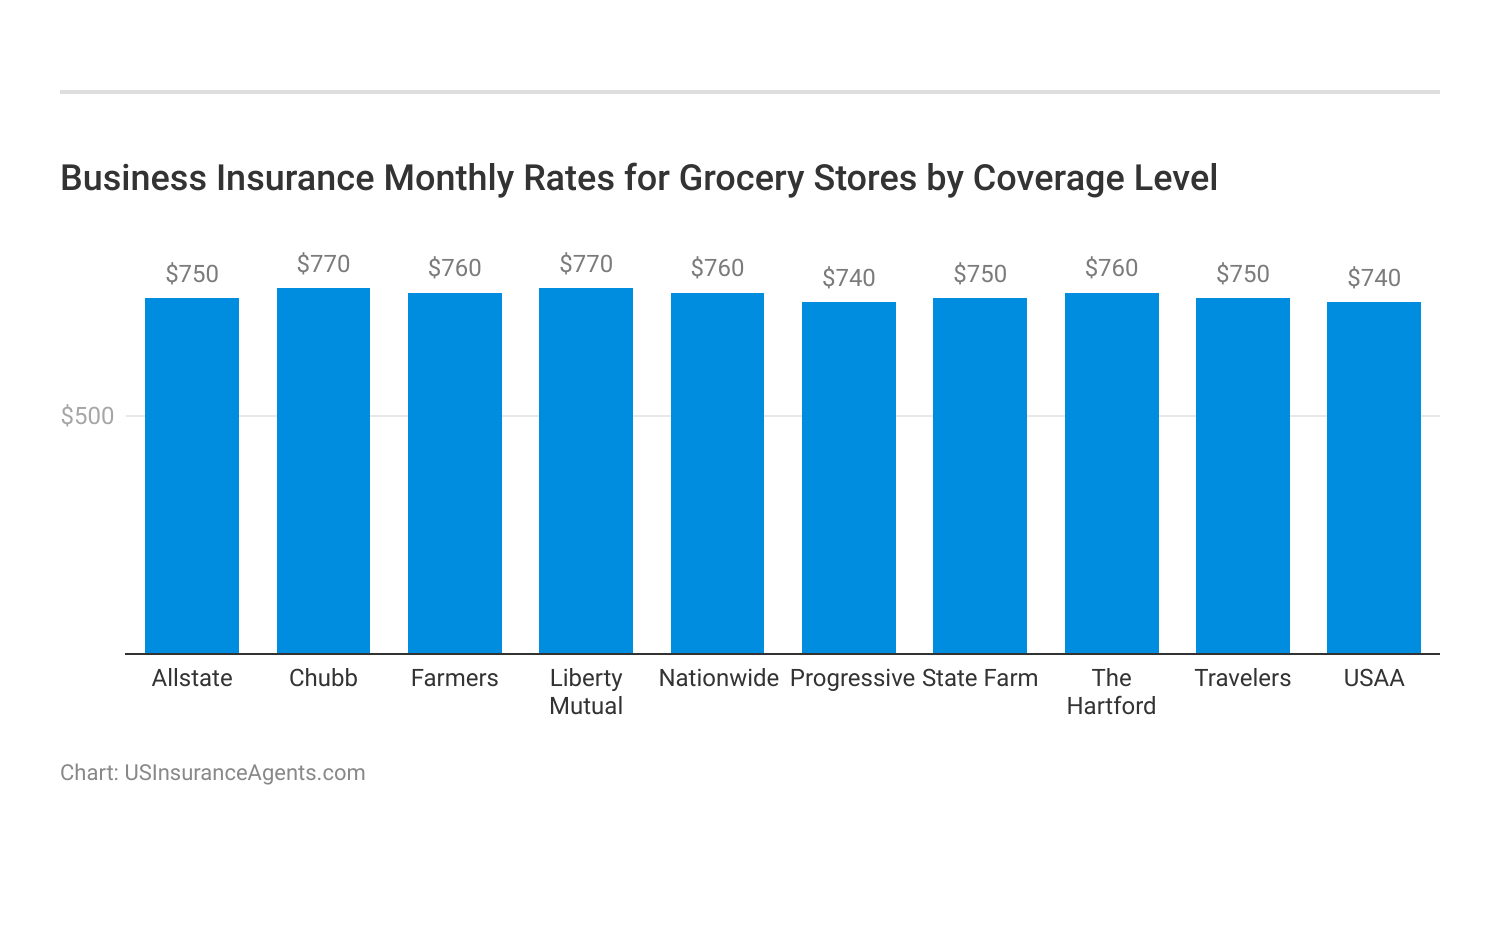 <h3>Business Insurance Monthly Rates for Grocery Stores by Coverage Level</h3>